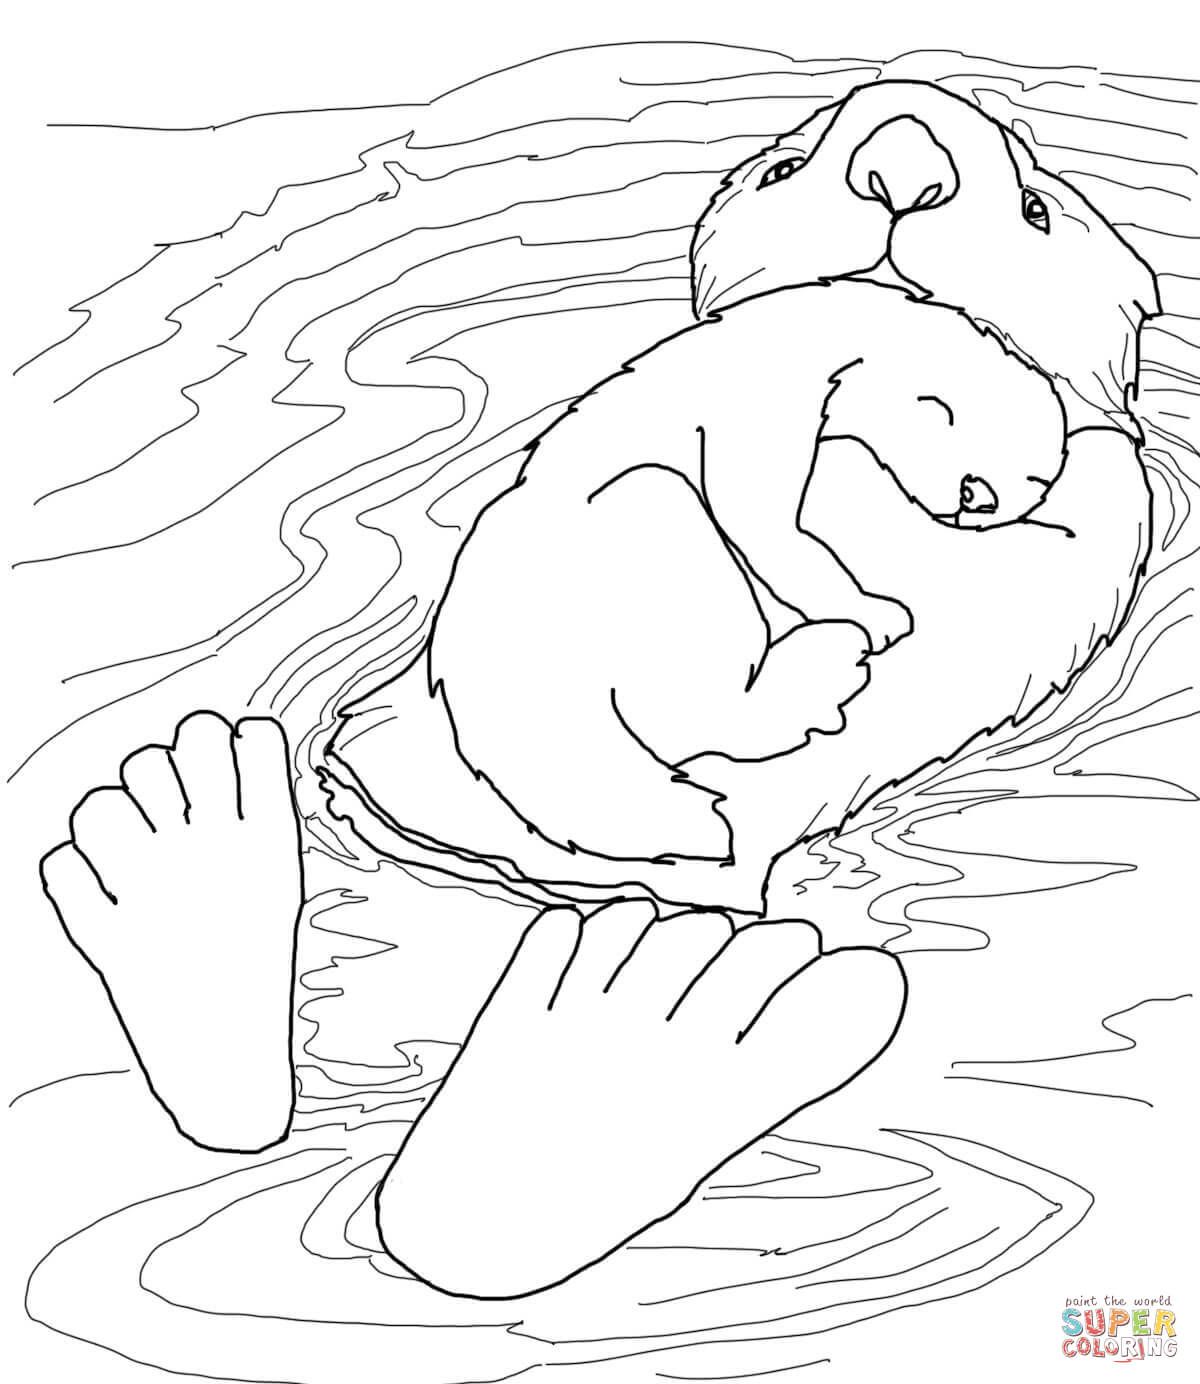 Sea Otter coloring #12, Download drawings